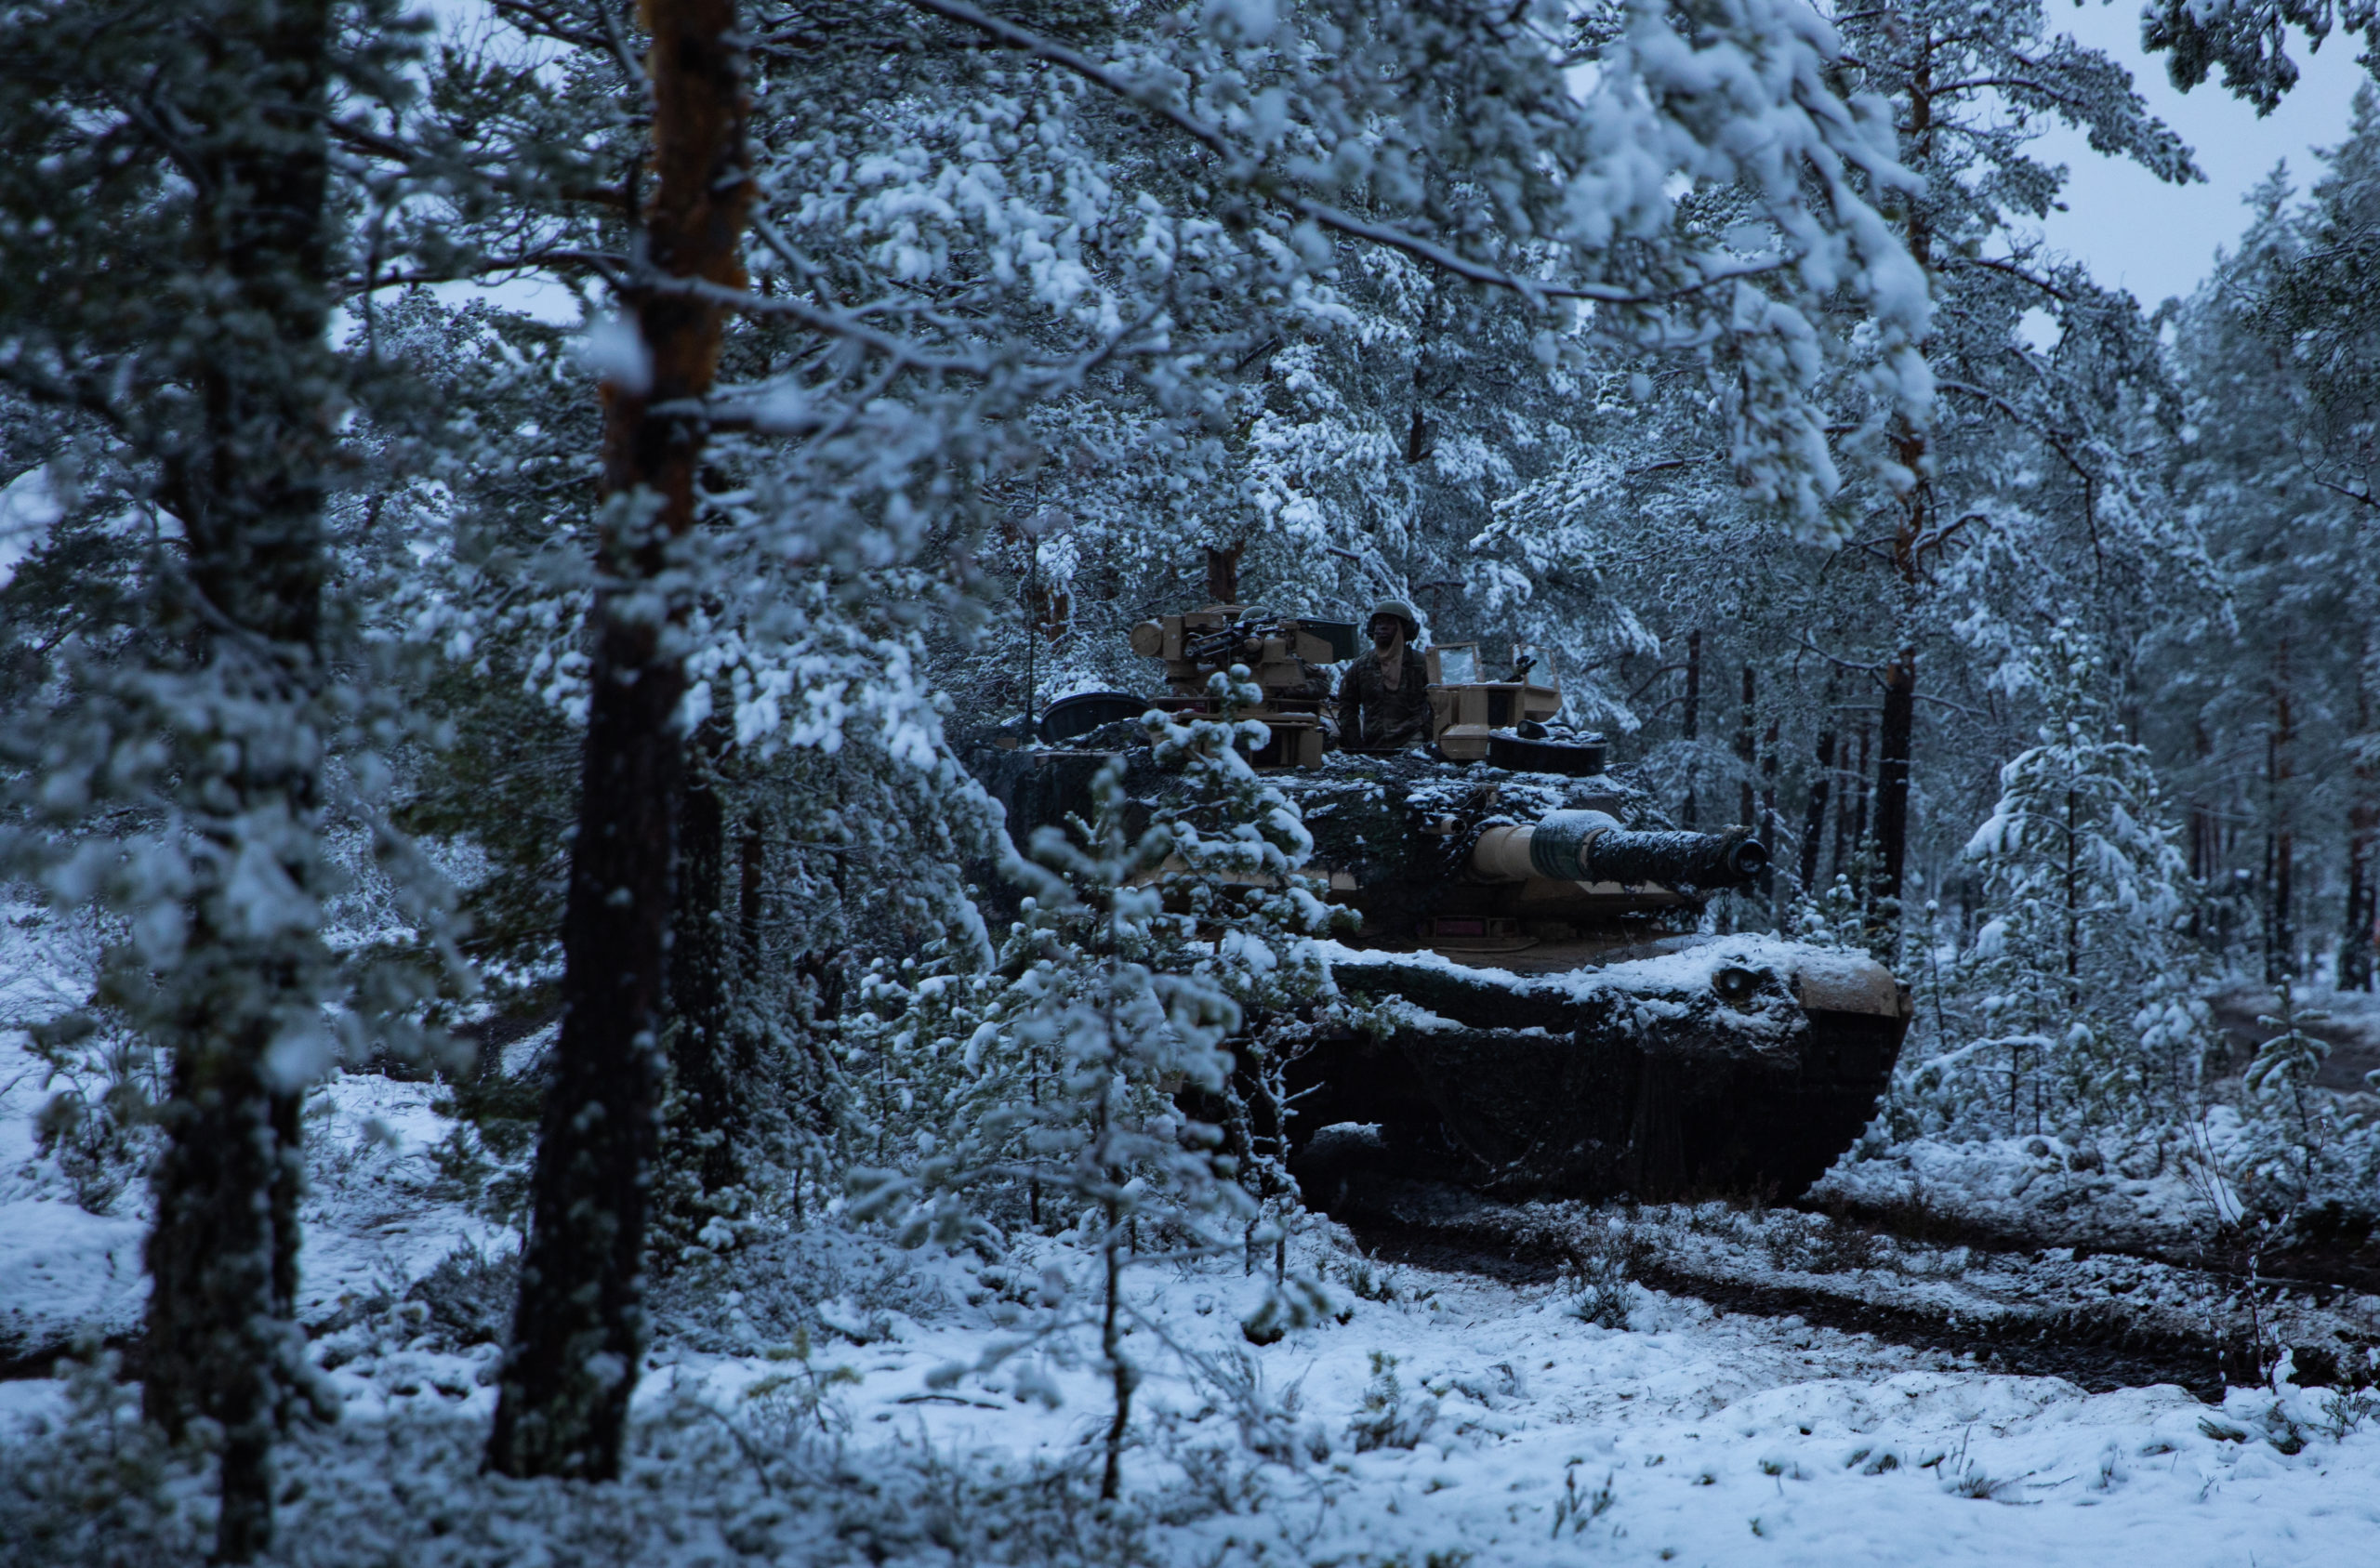 US and Finnish Forces train together in Finland with a tank